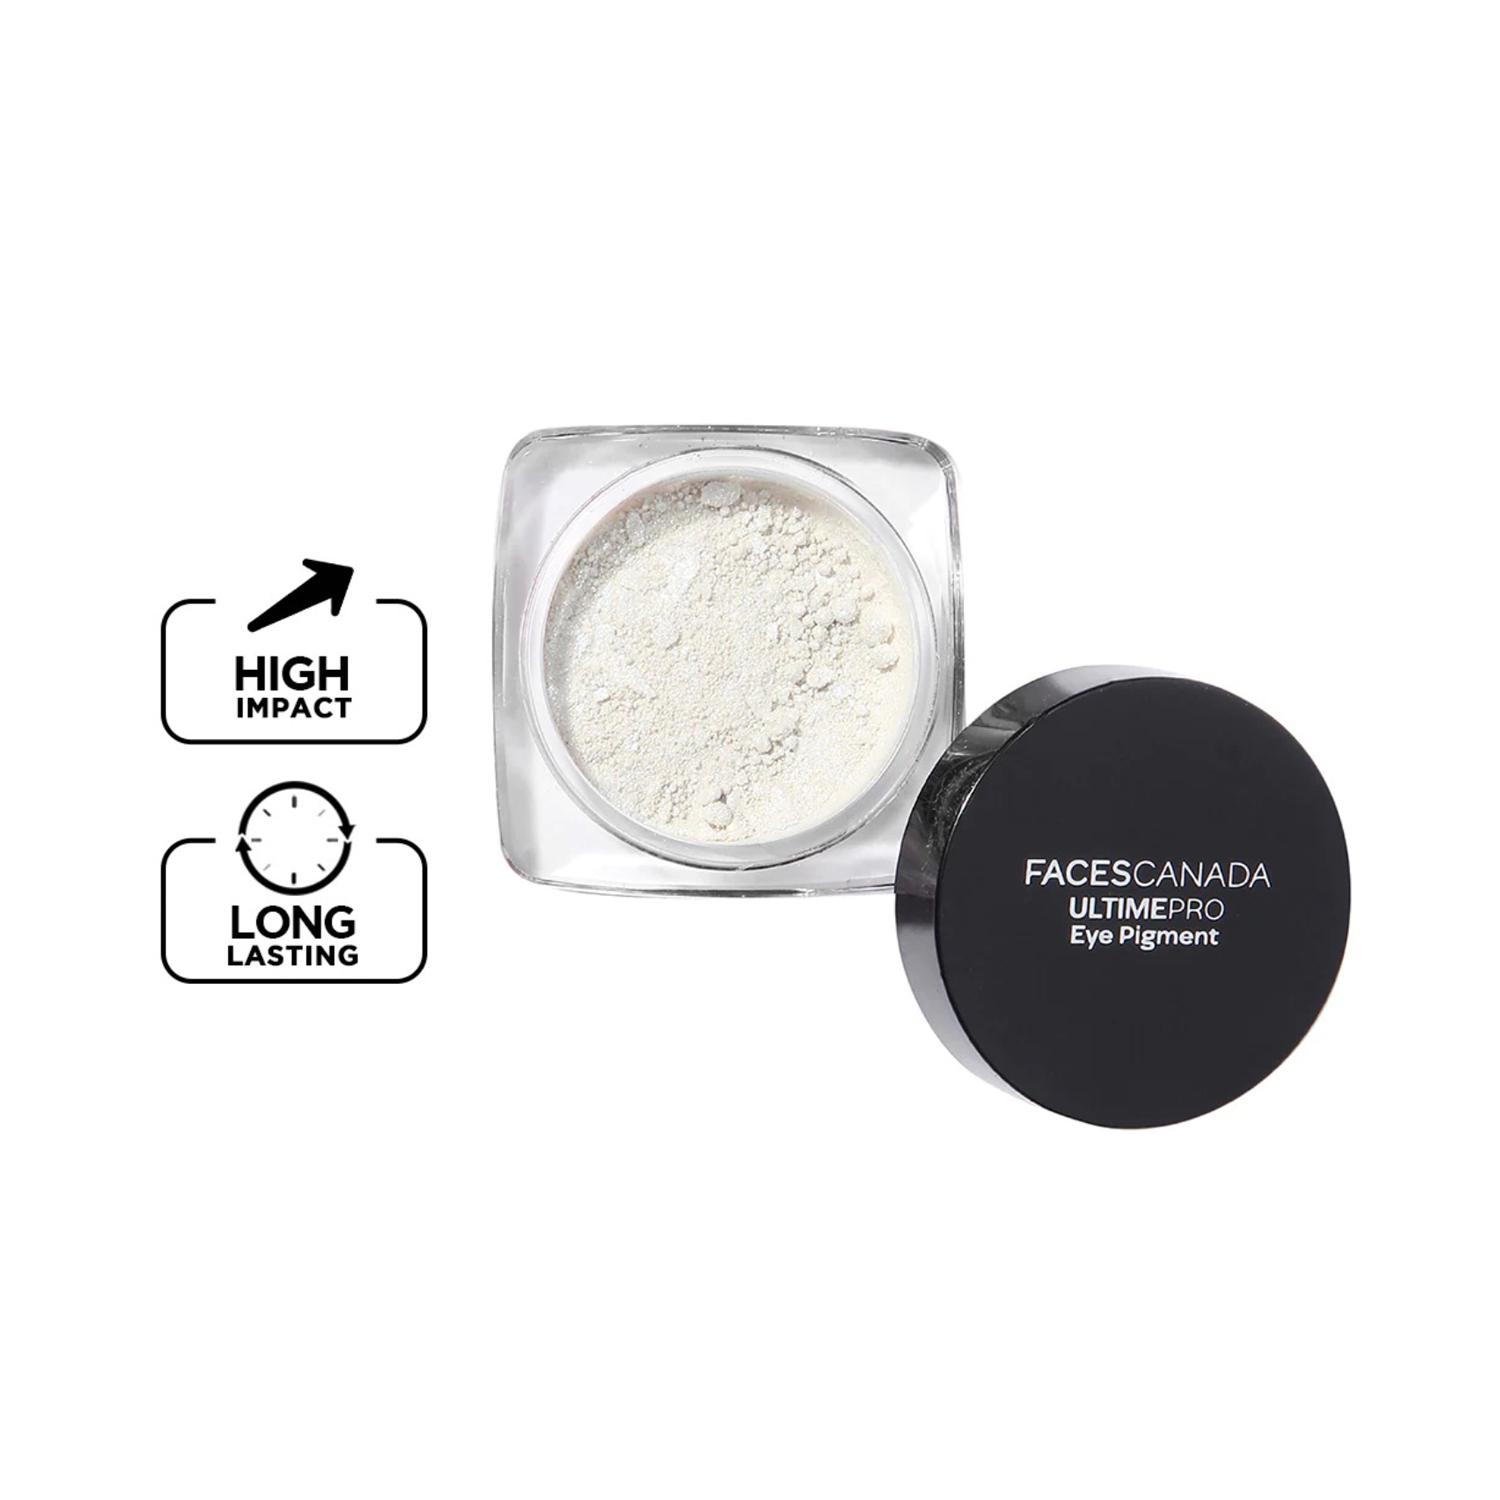 Faces Canada | Faces Canada Ultime Pro Eye Pigment - Silver 01, Shimmery Finish, Long-Lasting (1.8 g)